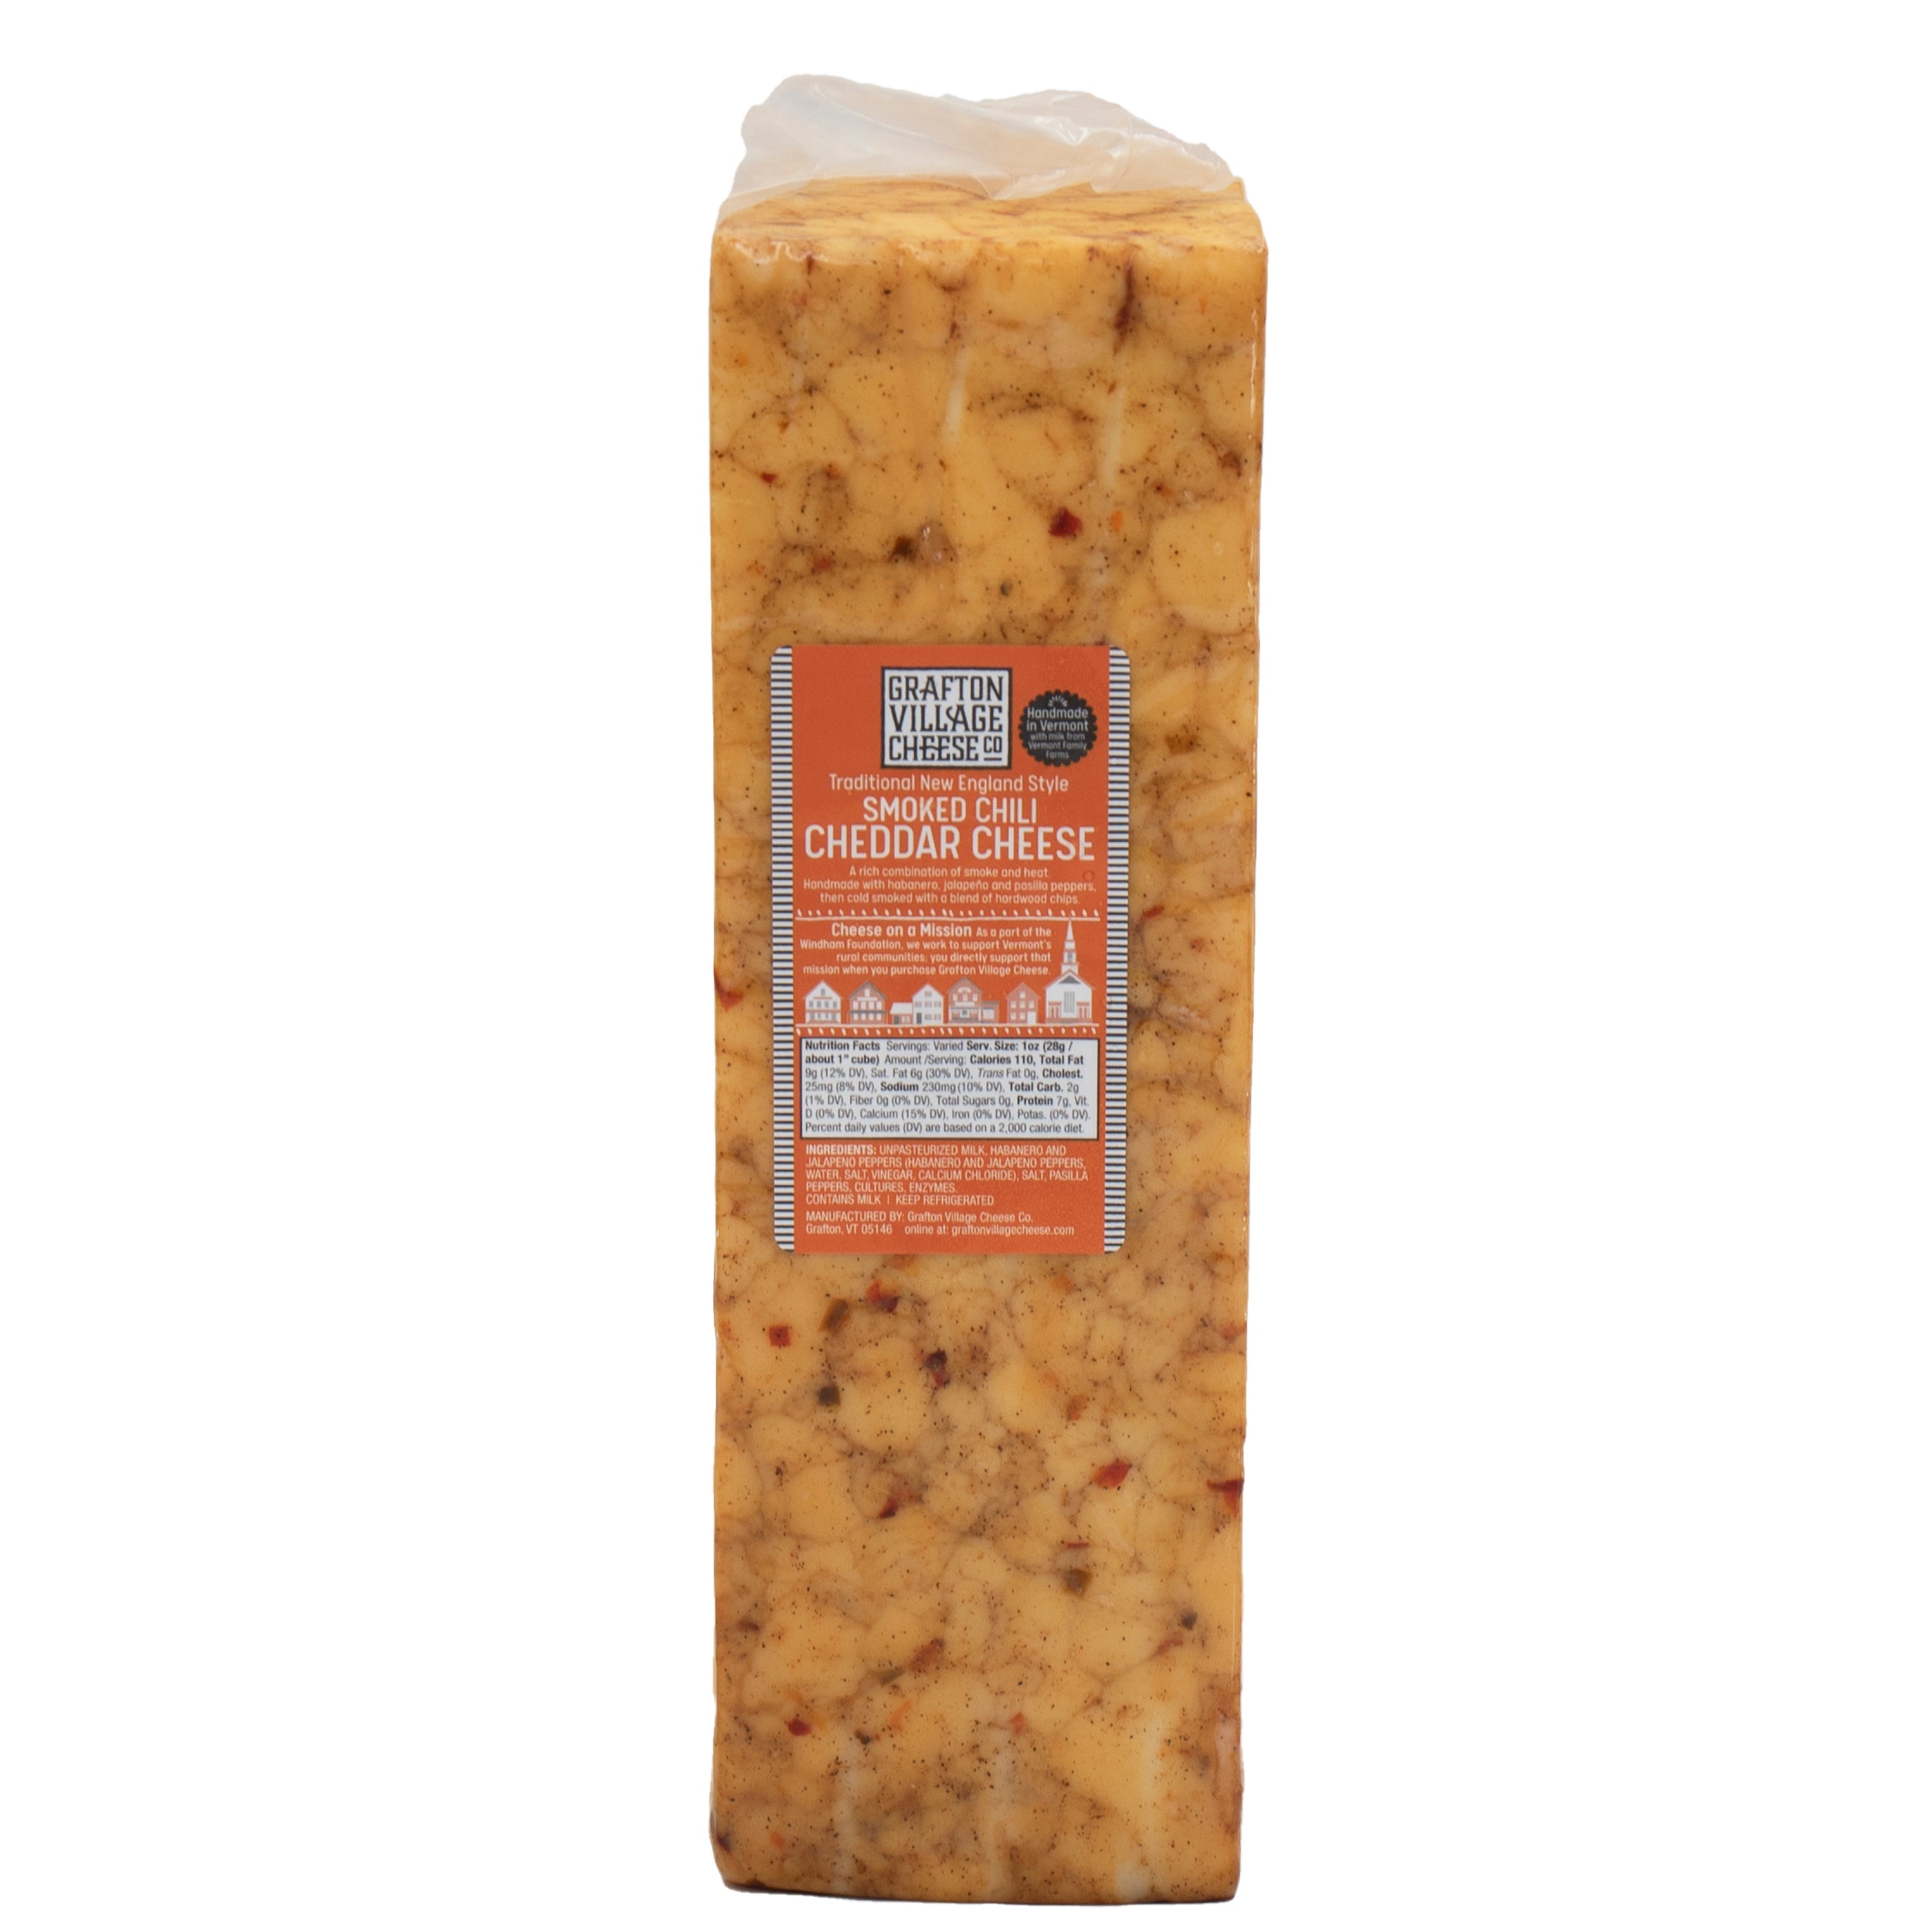 Grafton Village Cheese Smoked Chili Vermont Cheddar Cheese 5lb